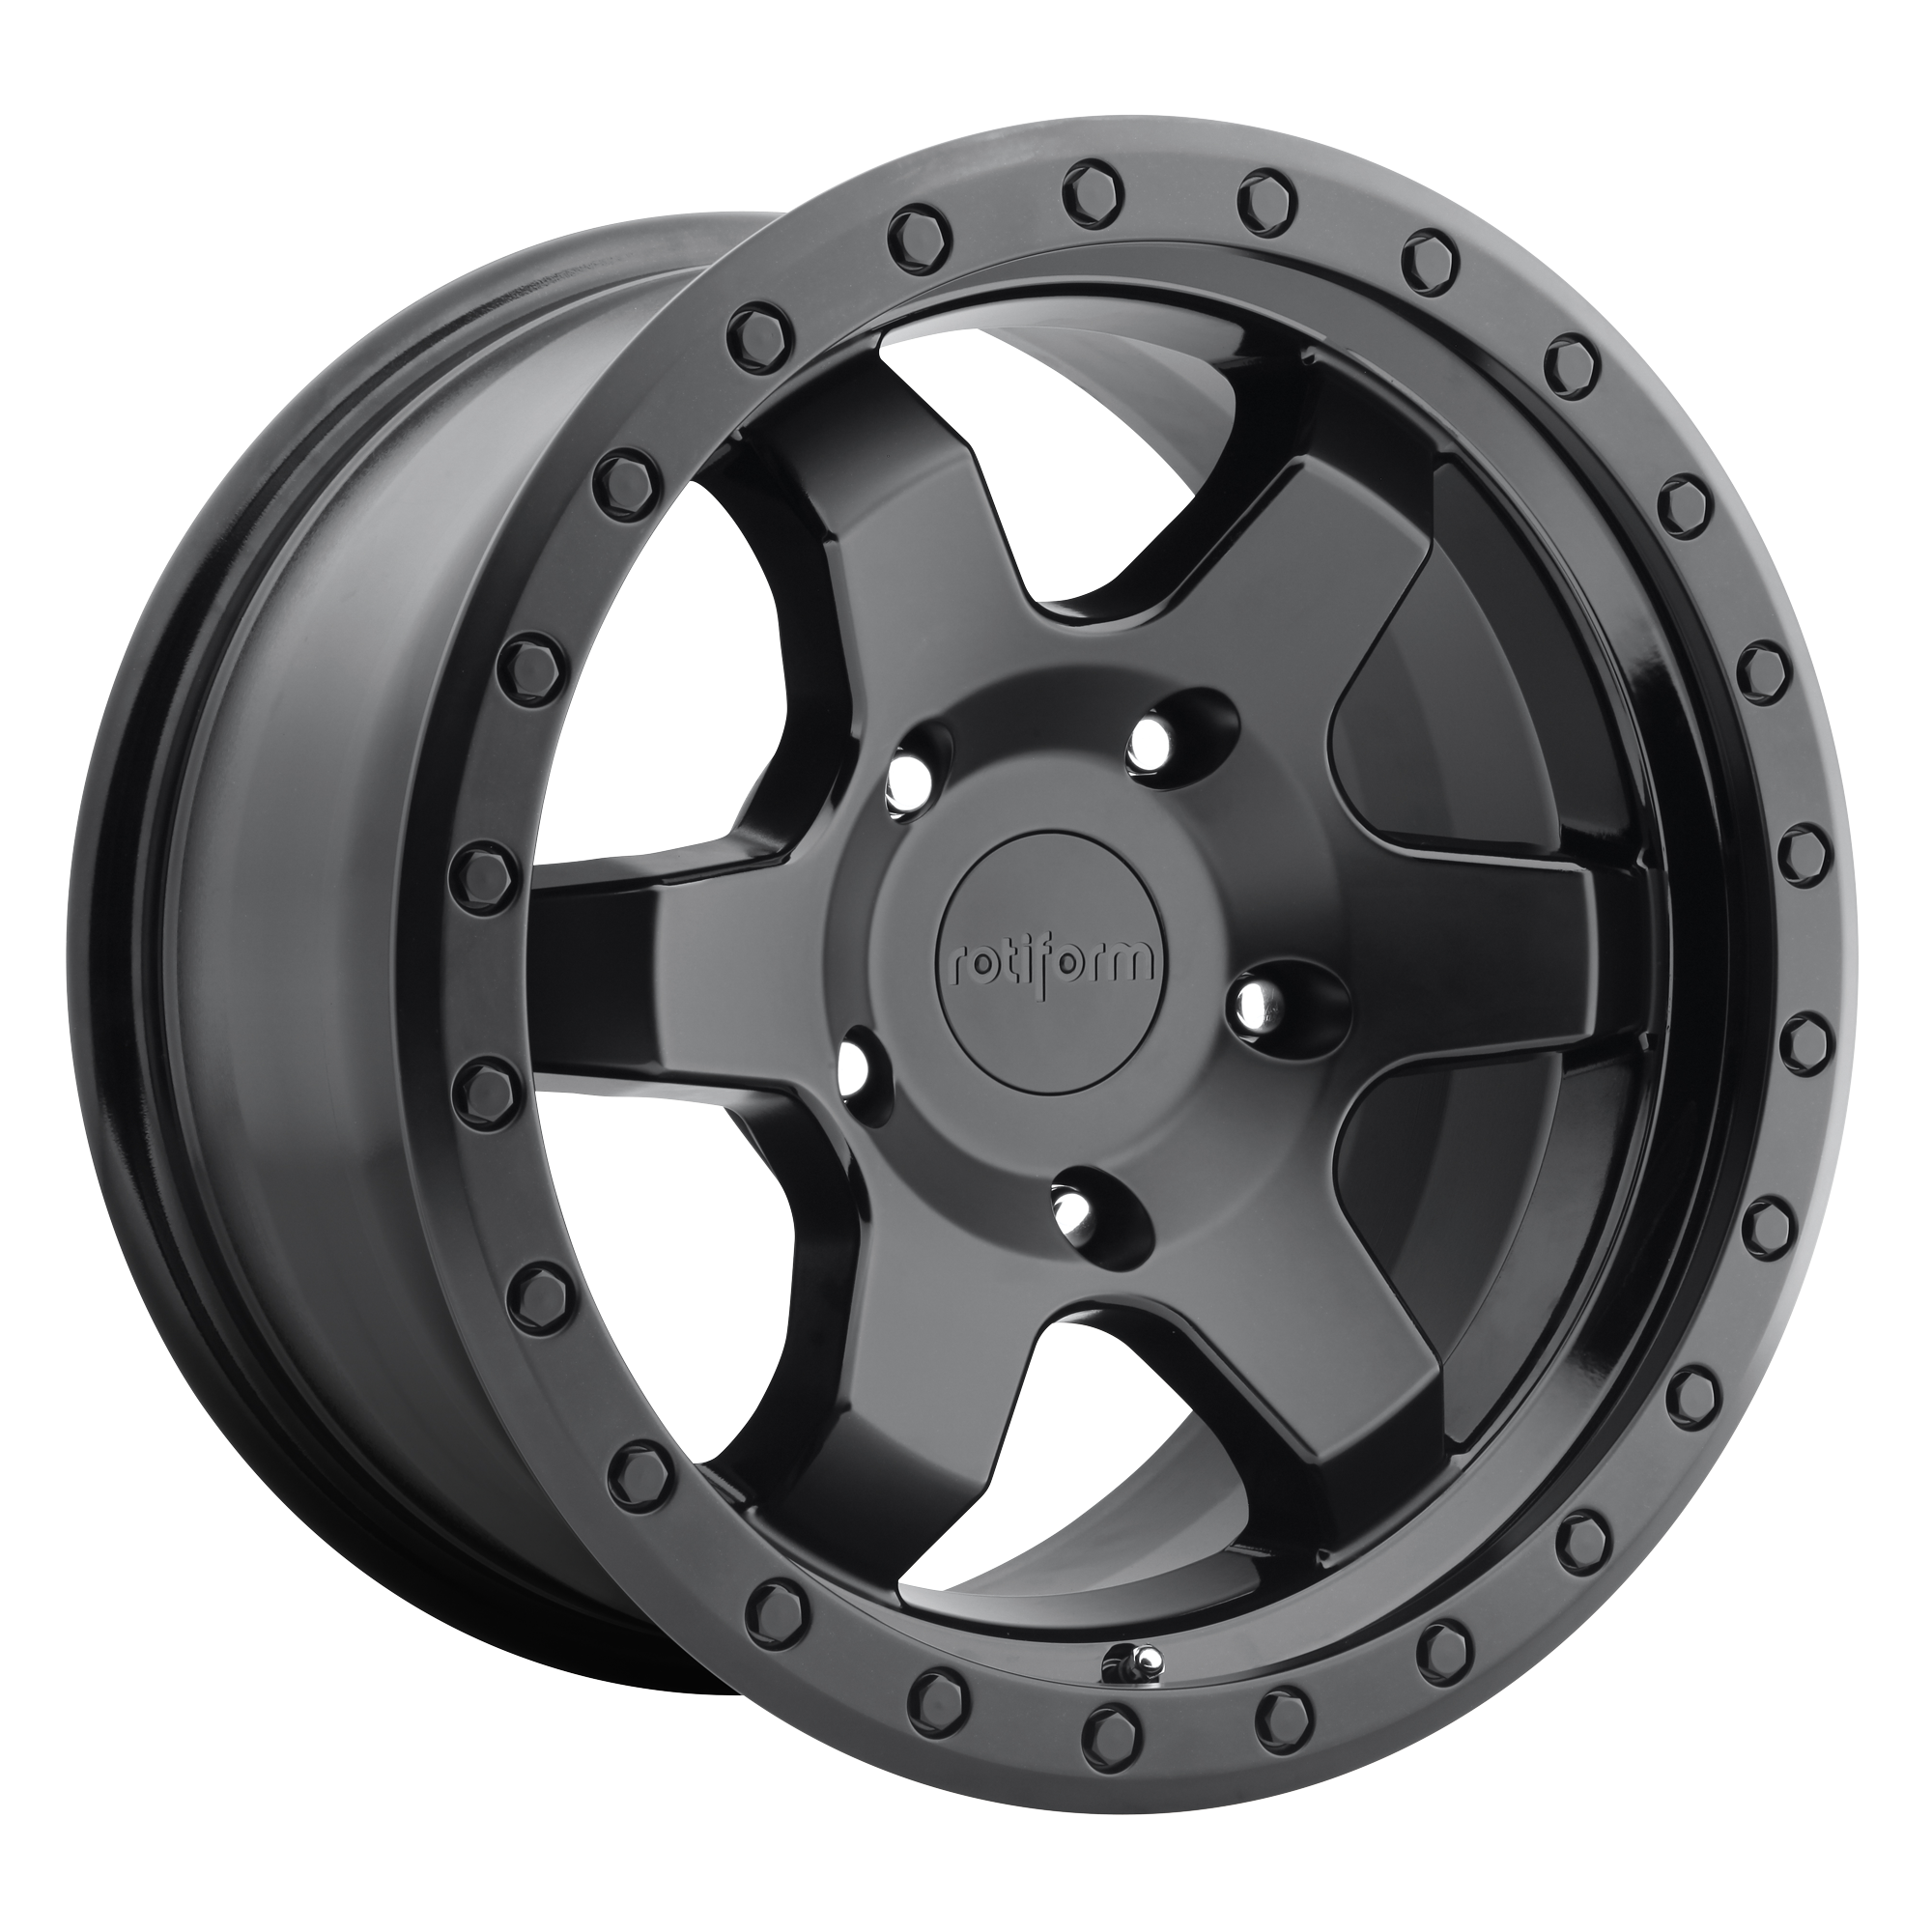 Диски Rotiform R151 SIX-OR</strong> </br>Диамет...